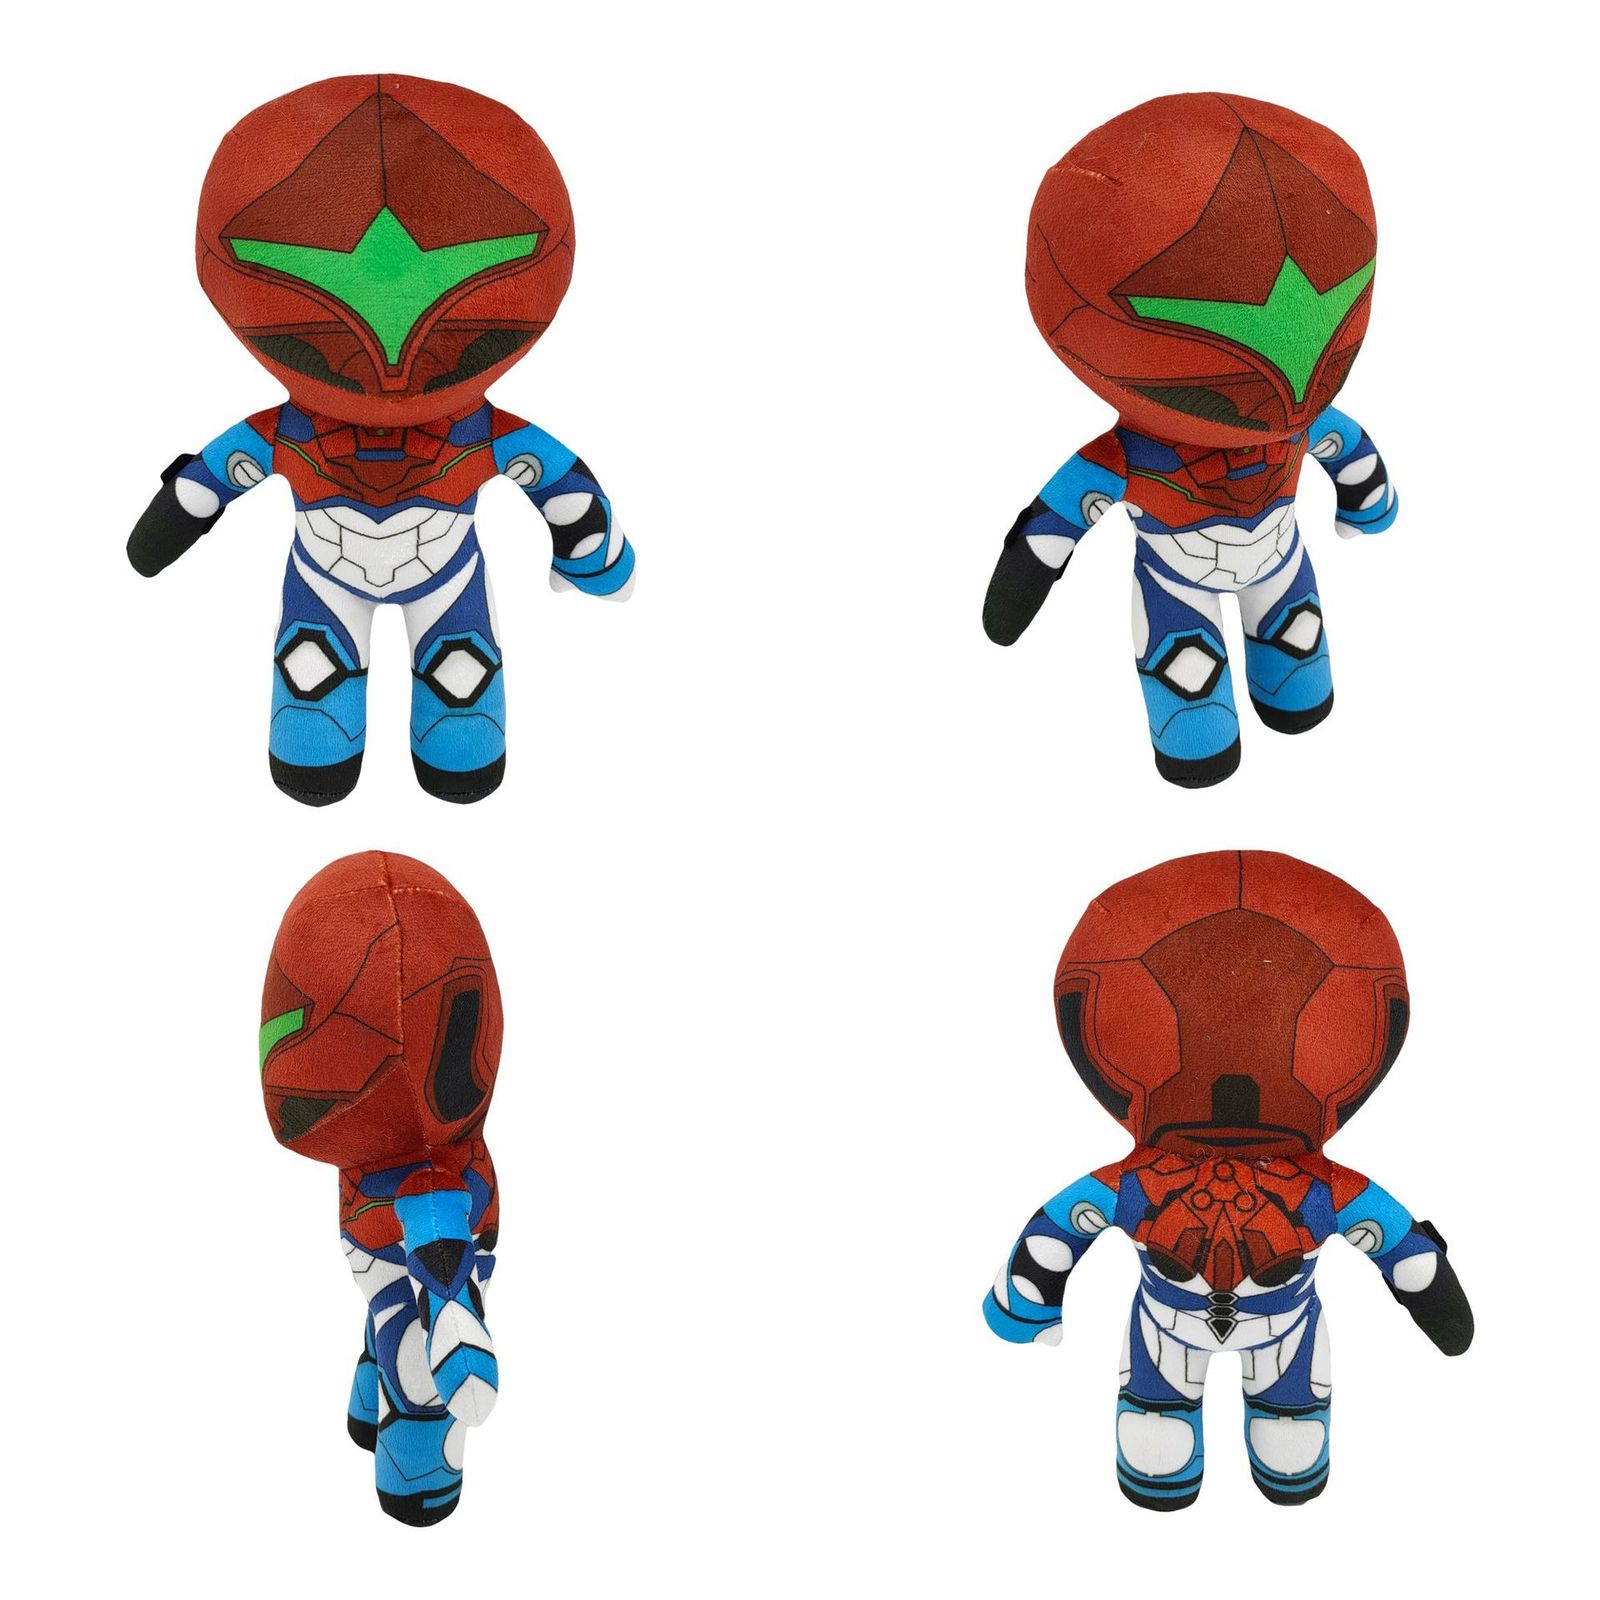 25cm Metroid Plush Toy Game Figure Doll Stuffed Soft Toy Gift